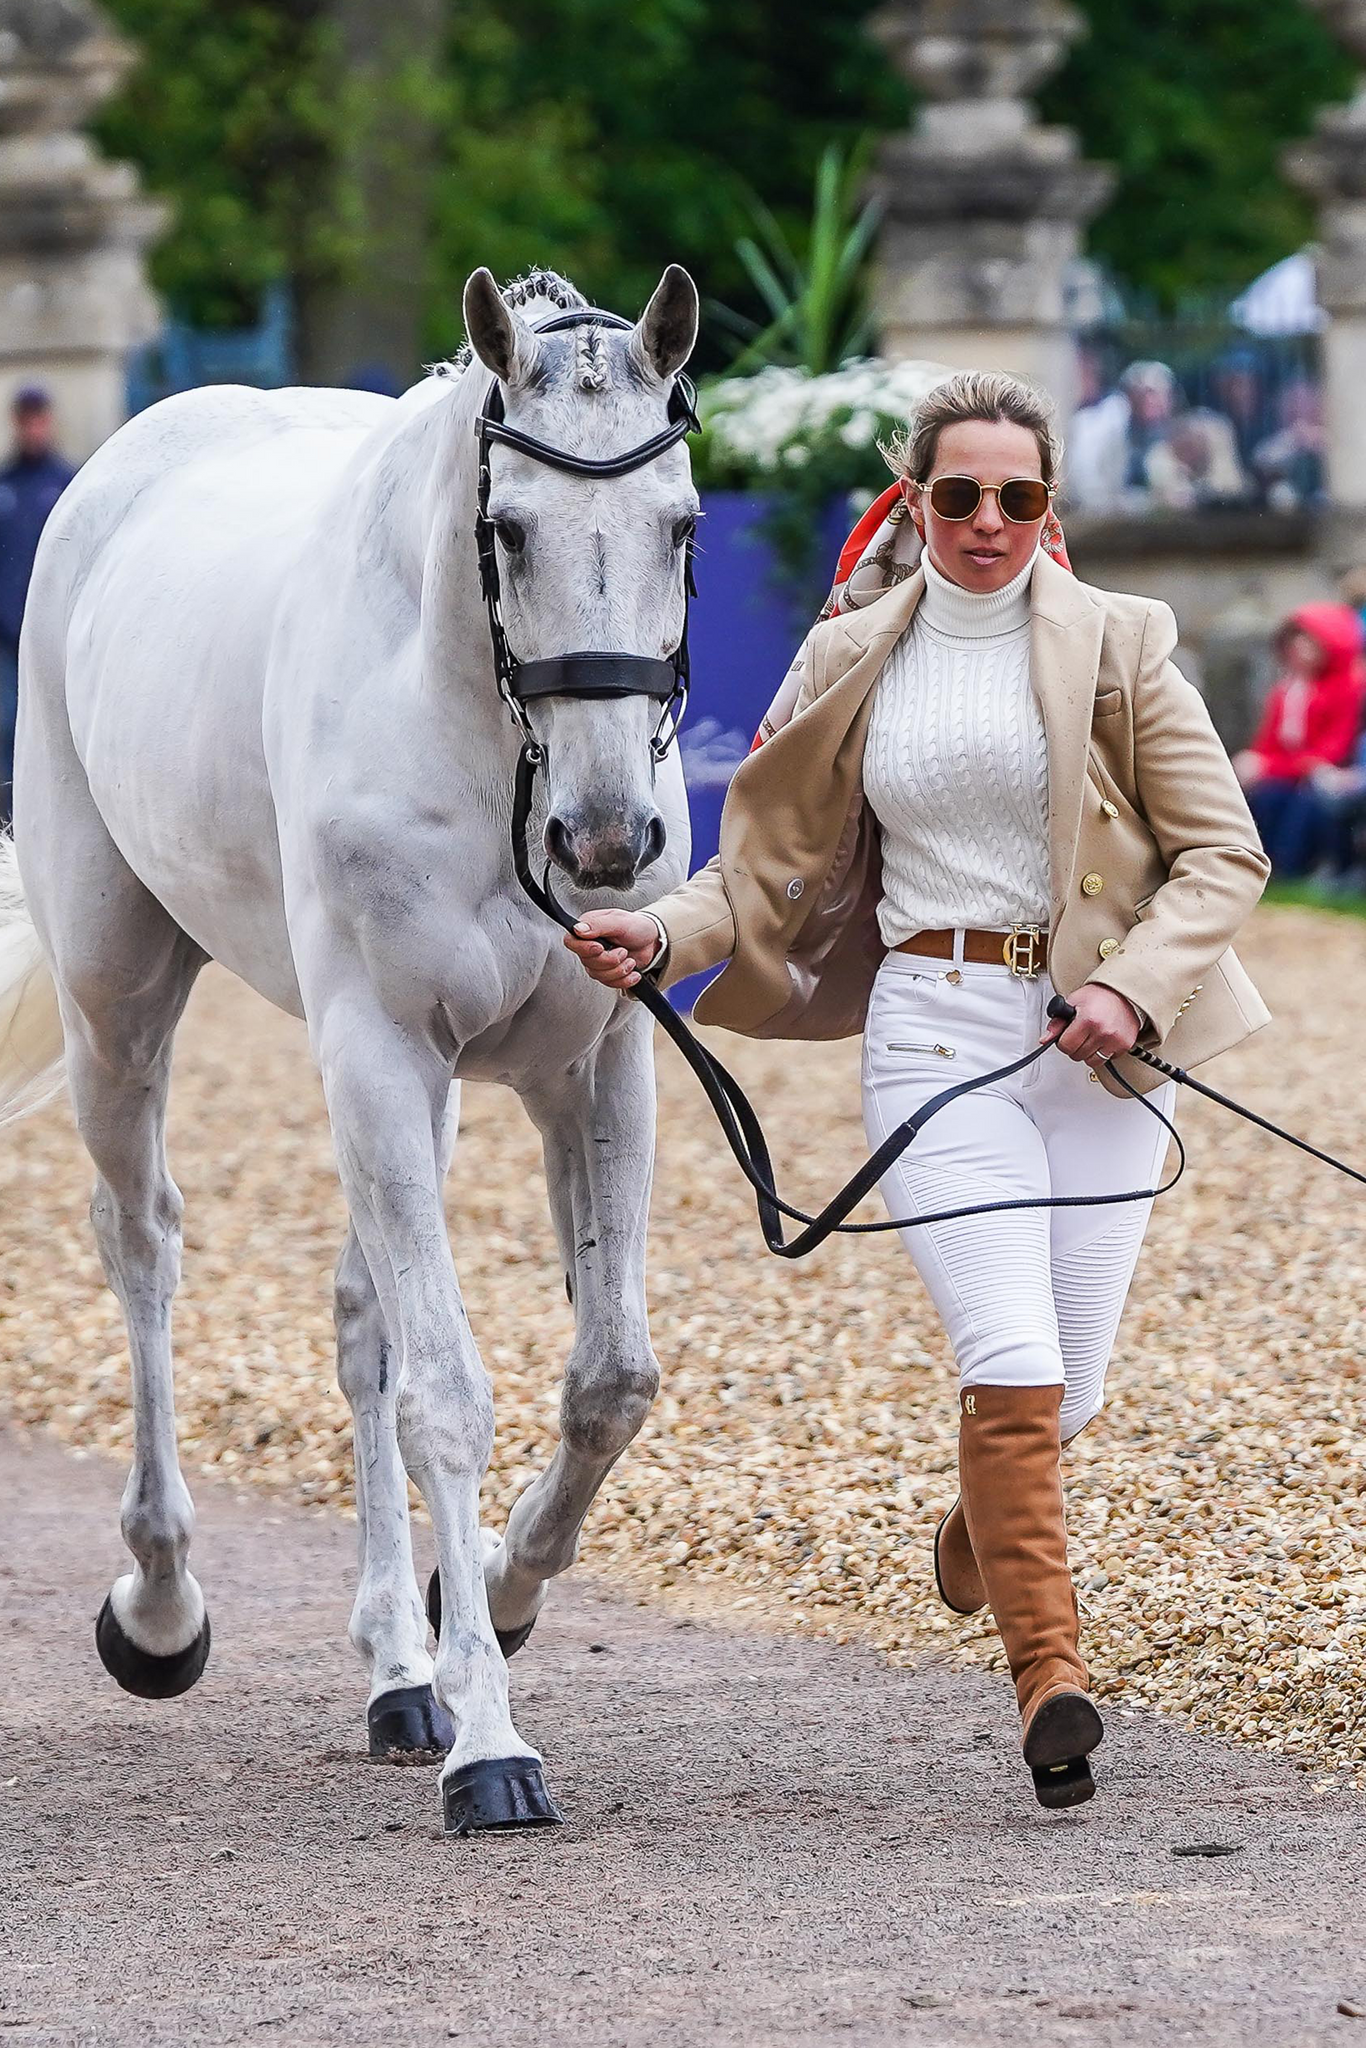 Kitty King's Trot Up Look One